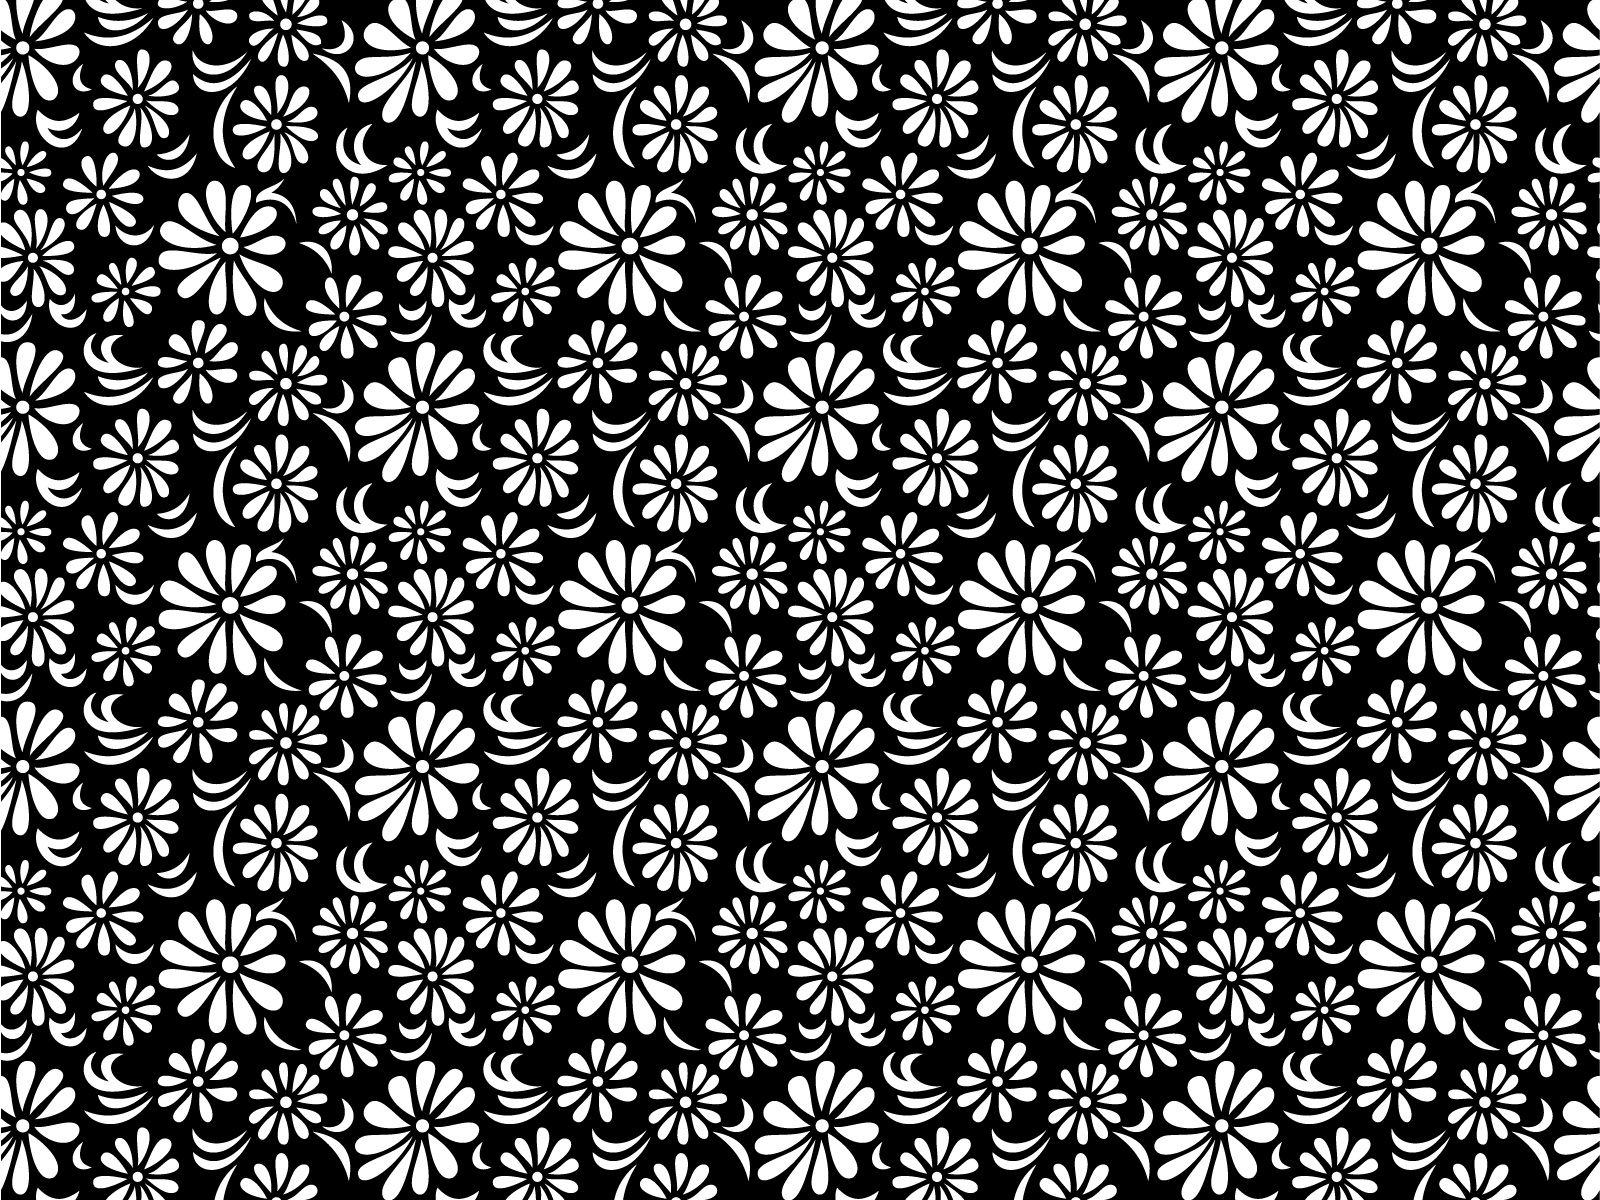 FREE Black & White Floral Wallpaper in PSD